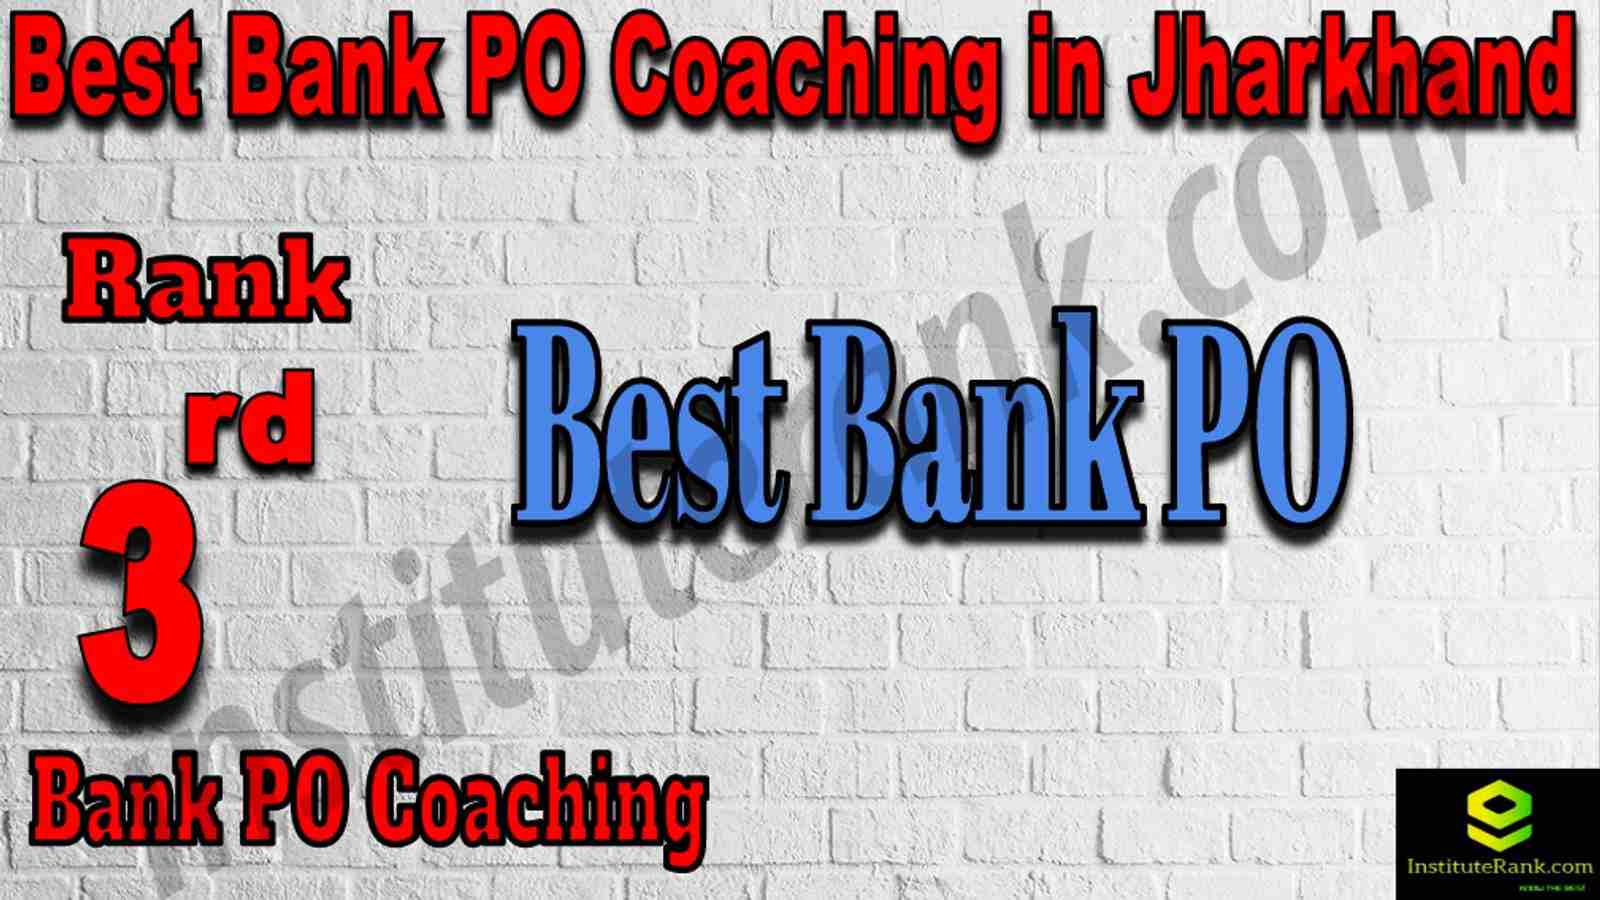 3rd Best Bank PO Coaching in Jharkhand